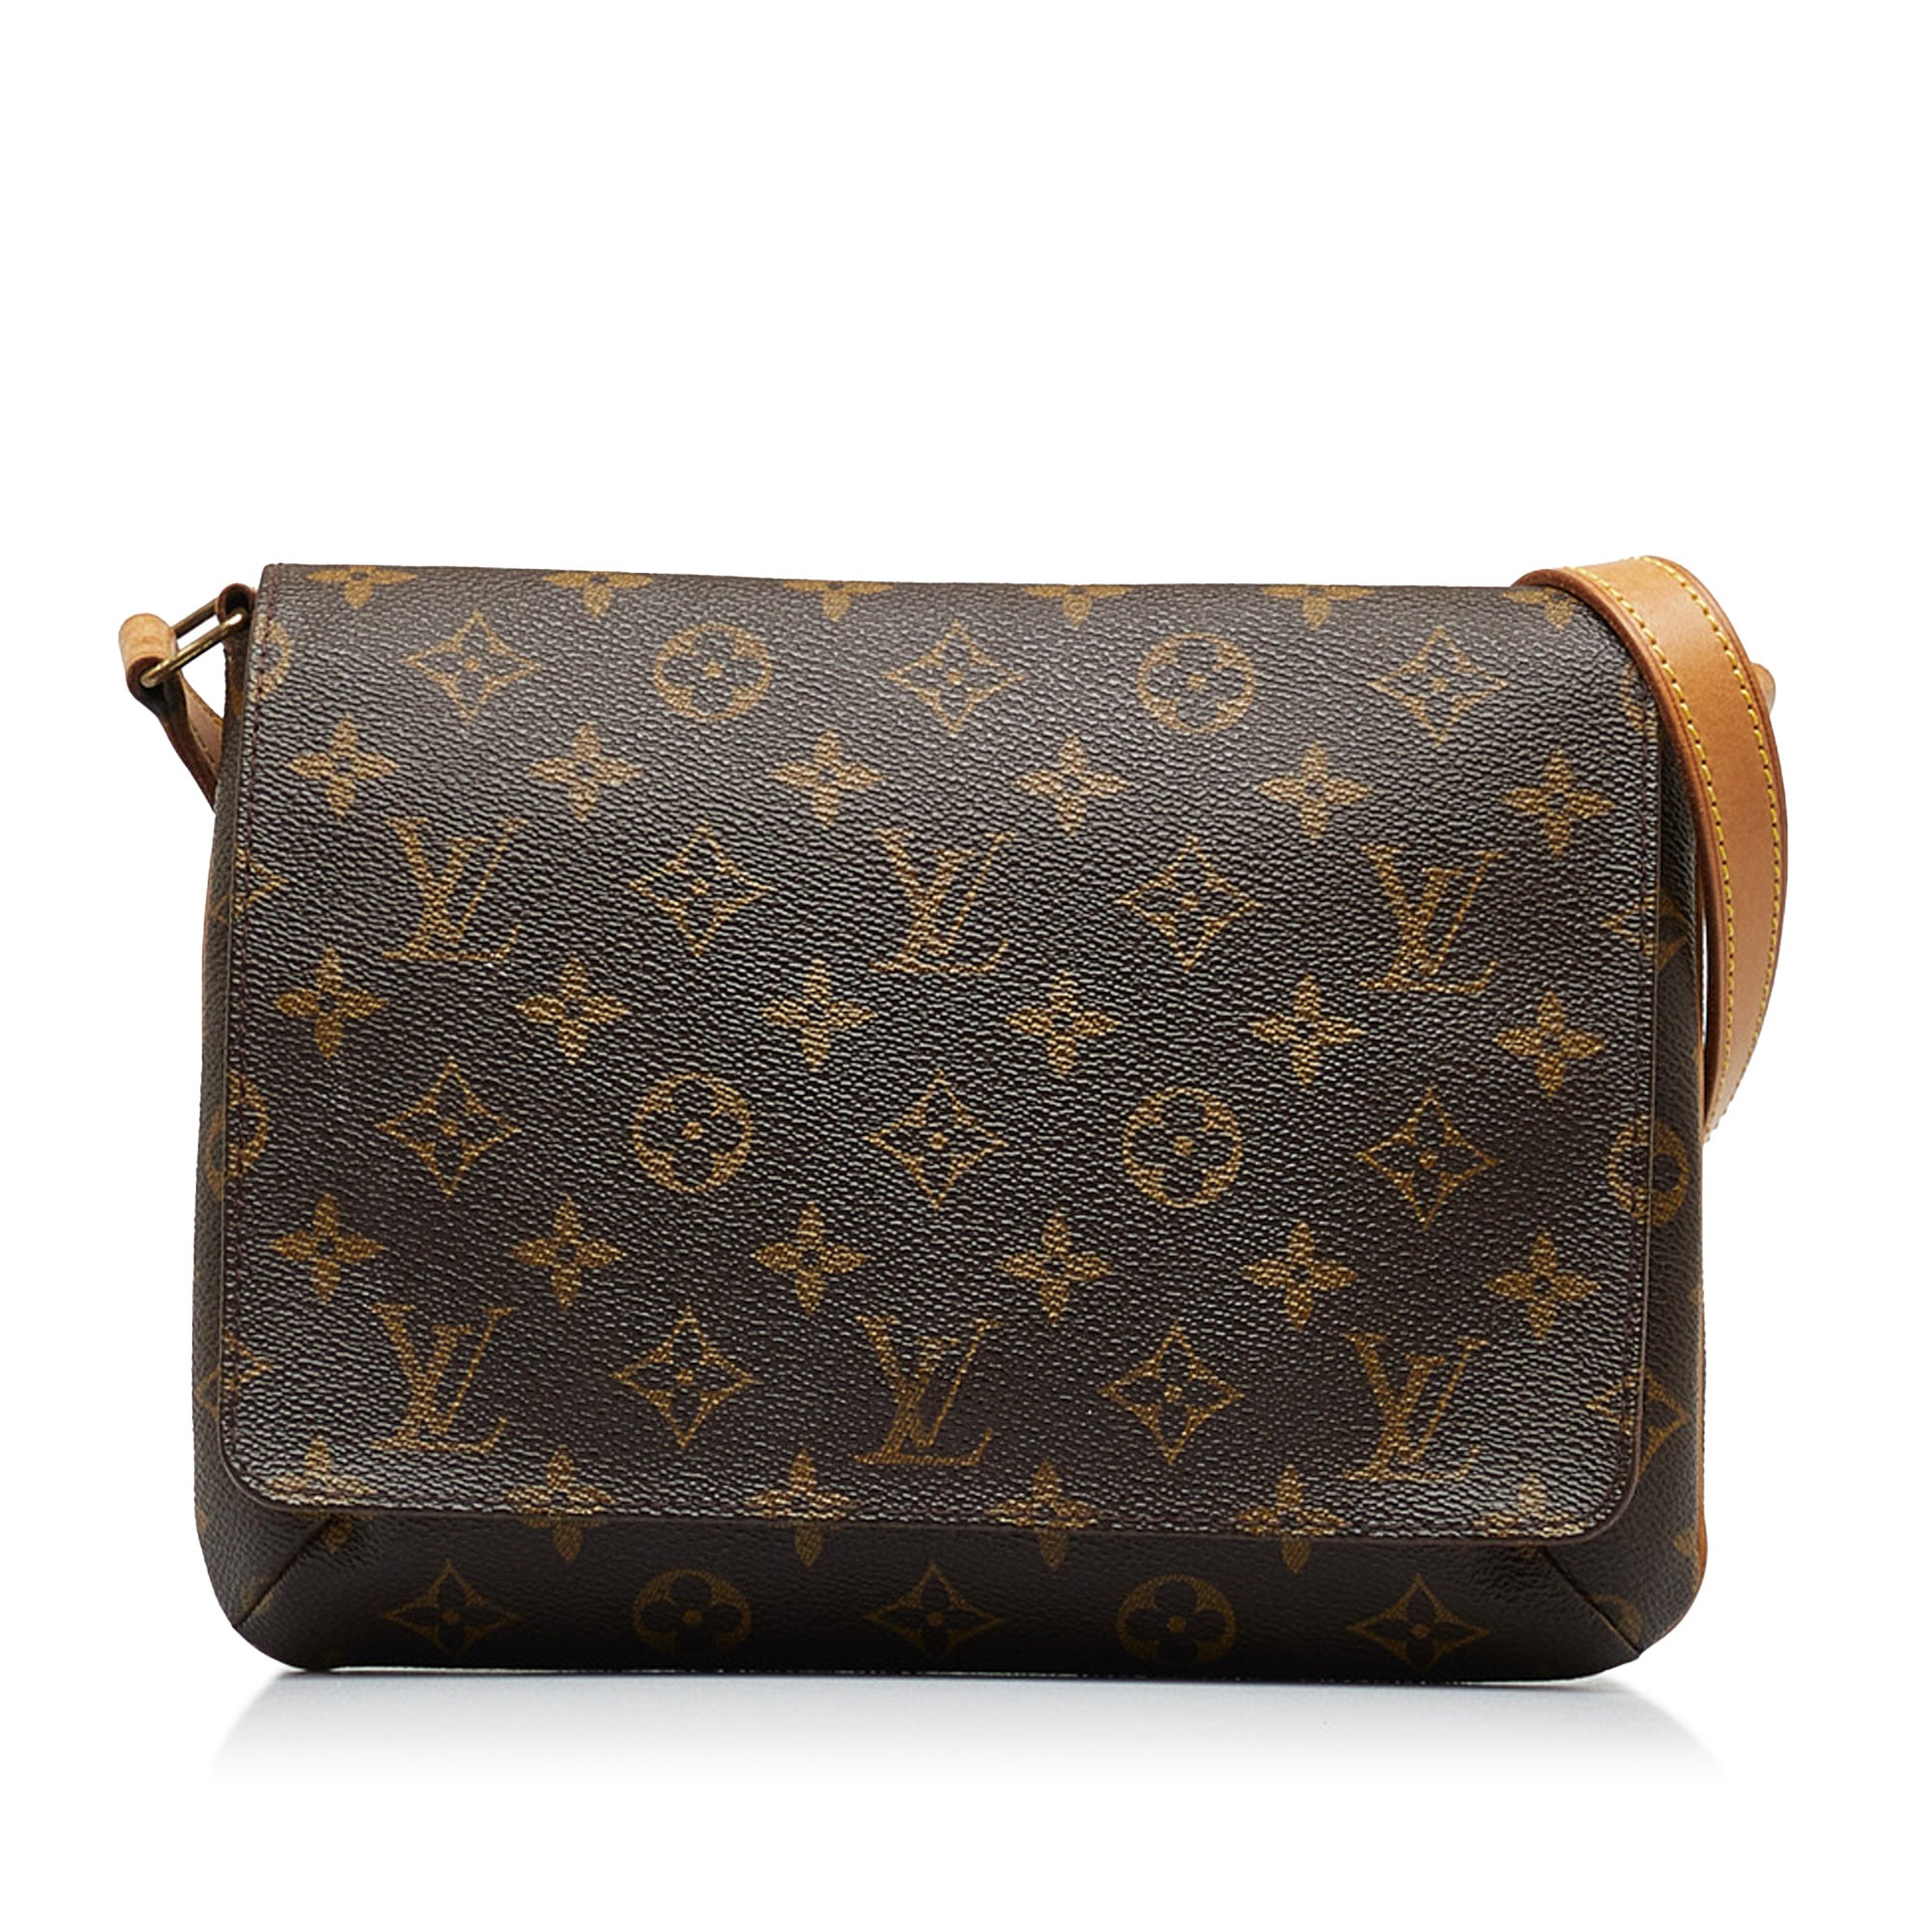 Shop for Louis Vuitton Monogram Canvas Leather Tango Crossbody Bag -  Shipped from USA